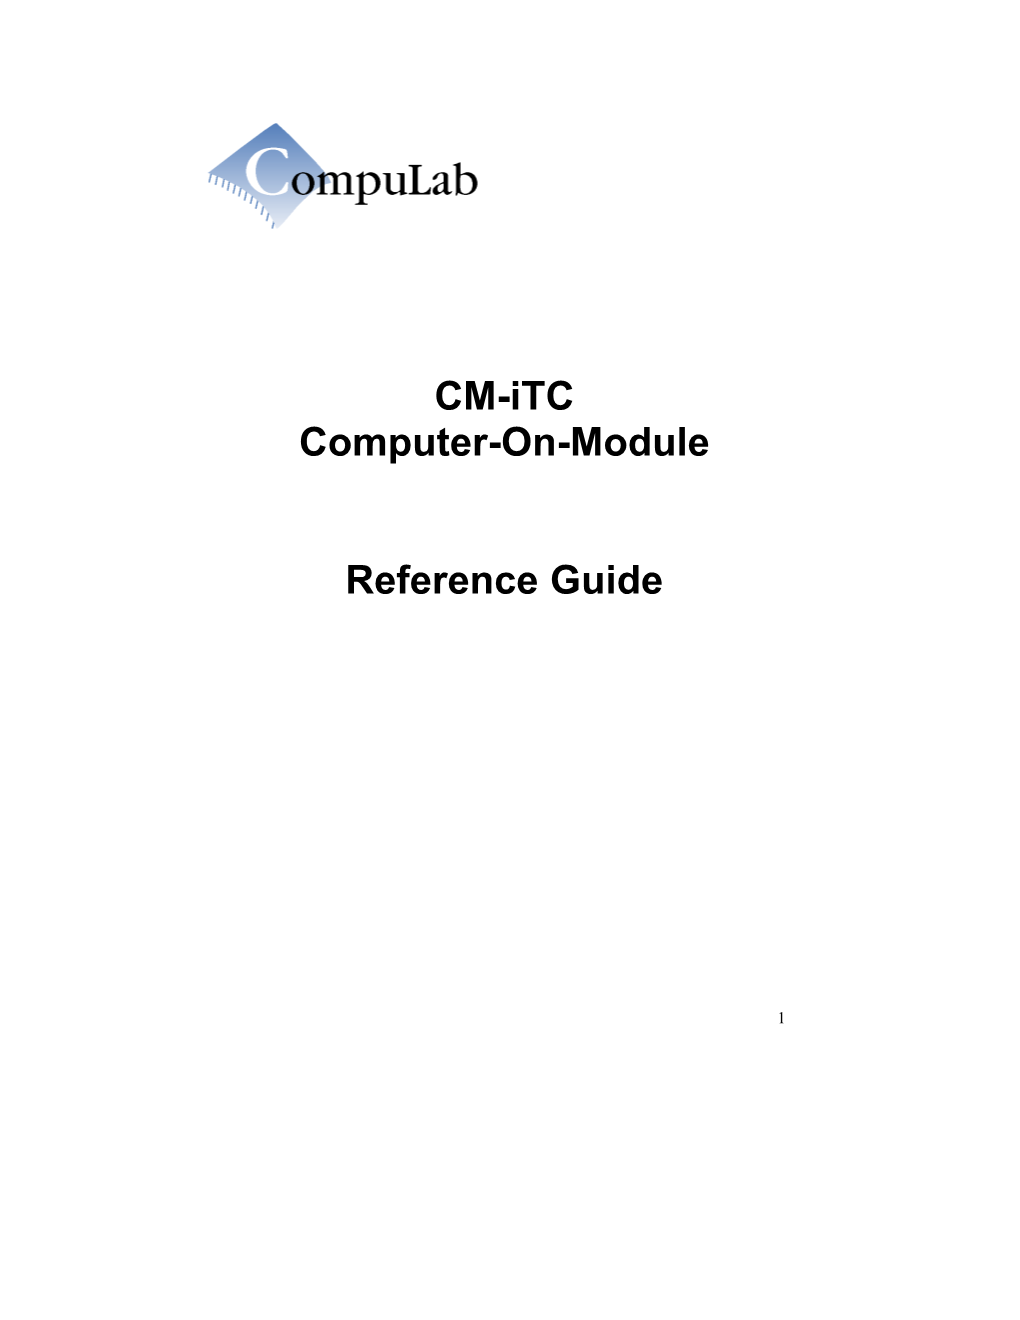 CM-Itc Reference Guide